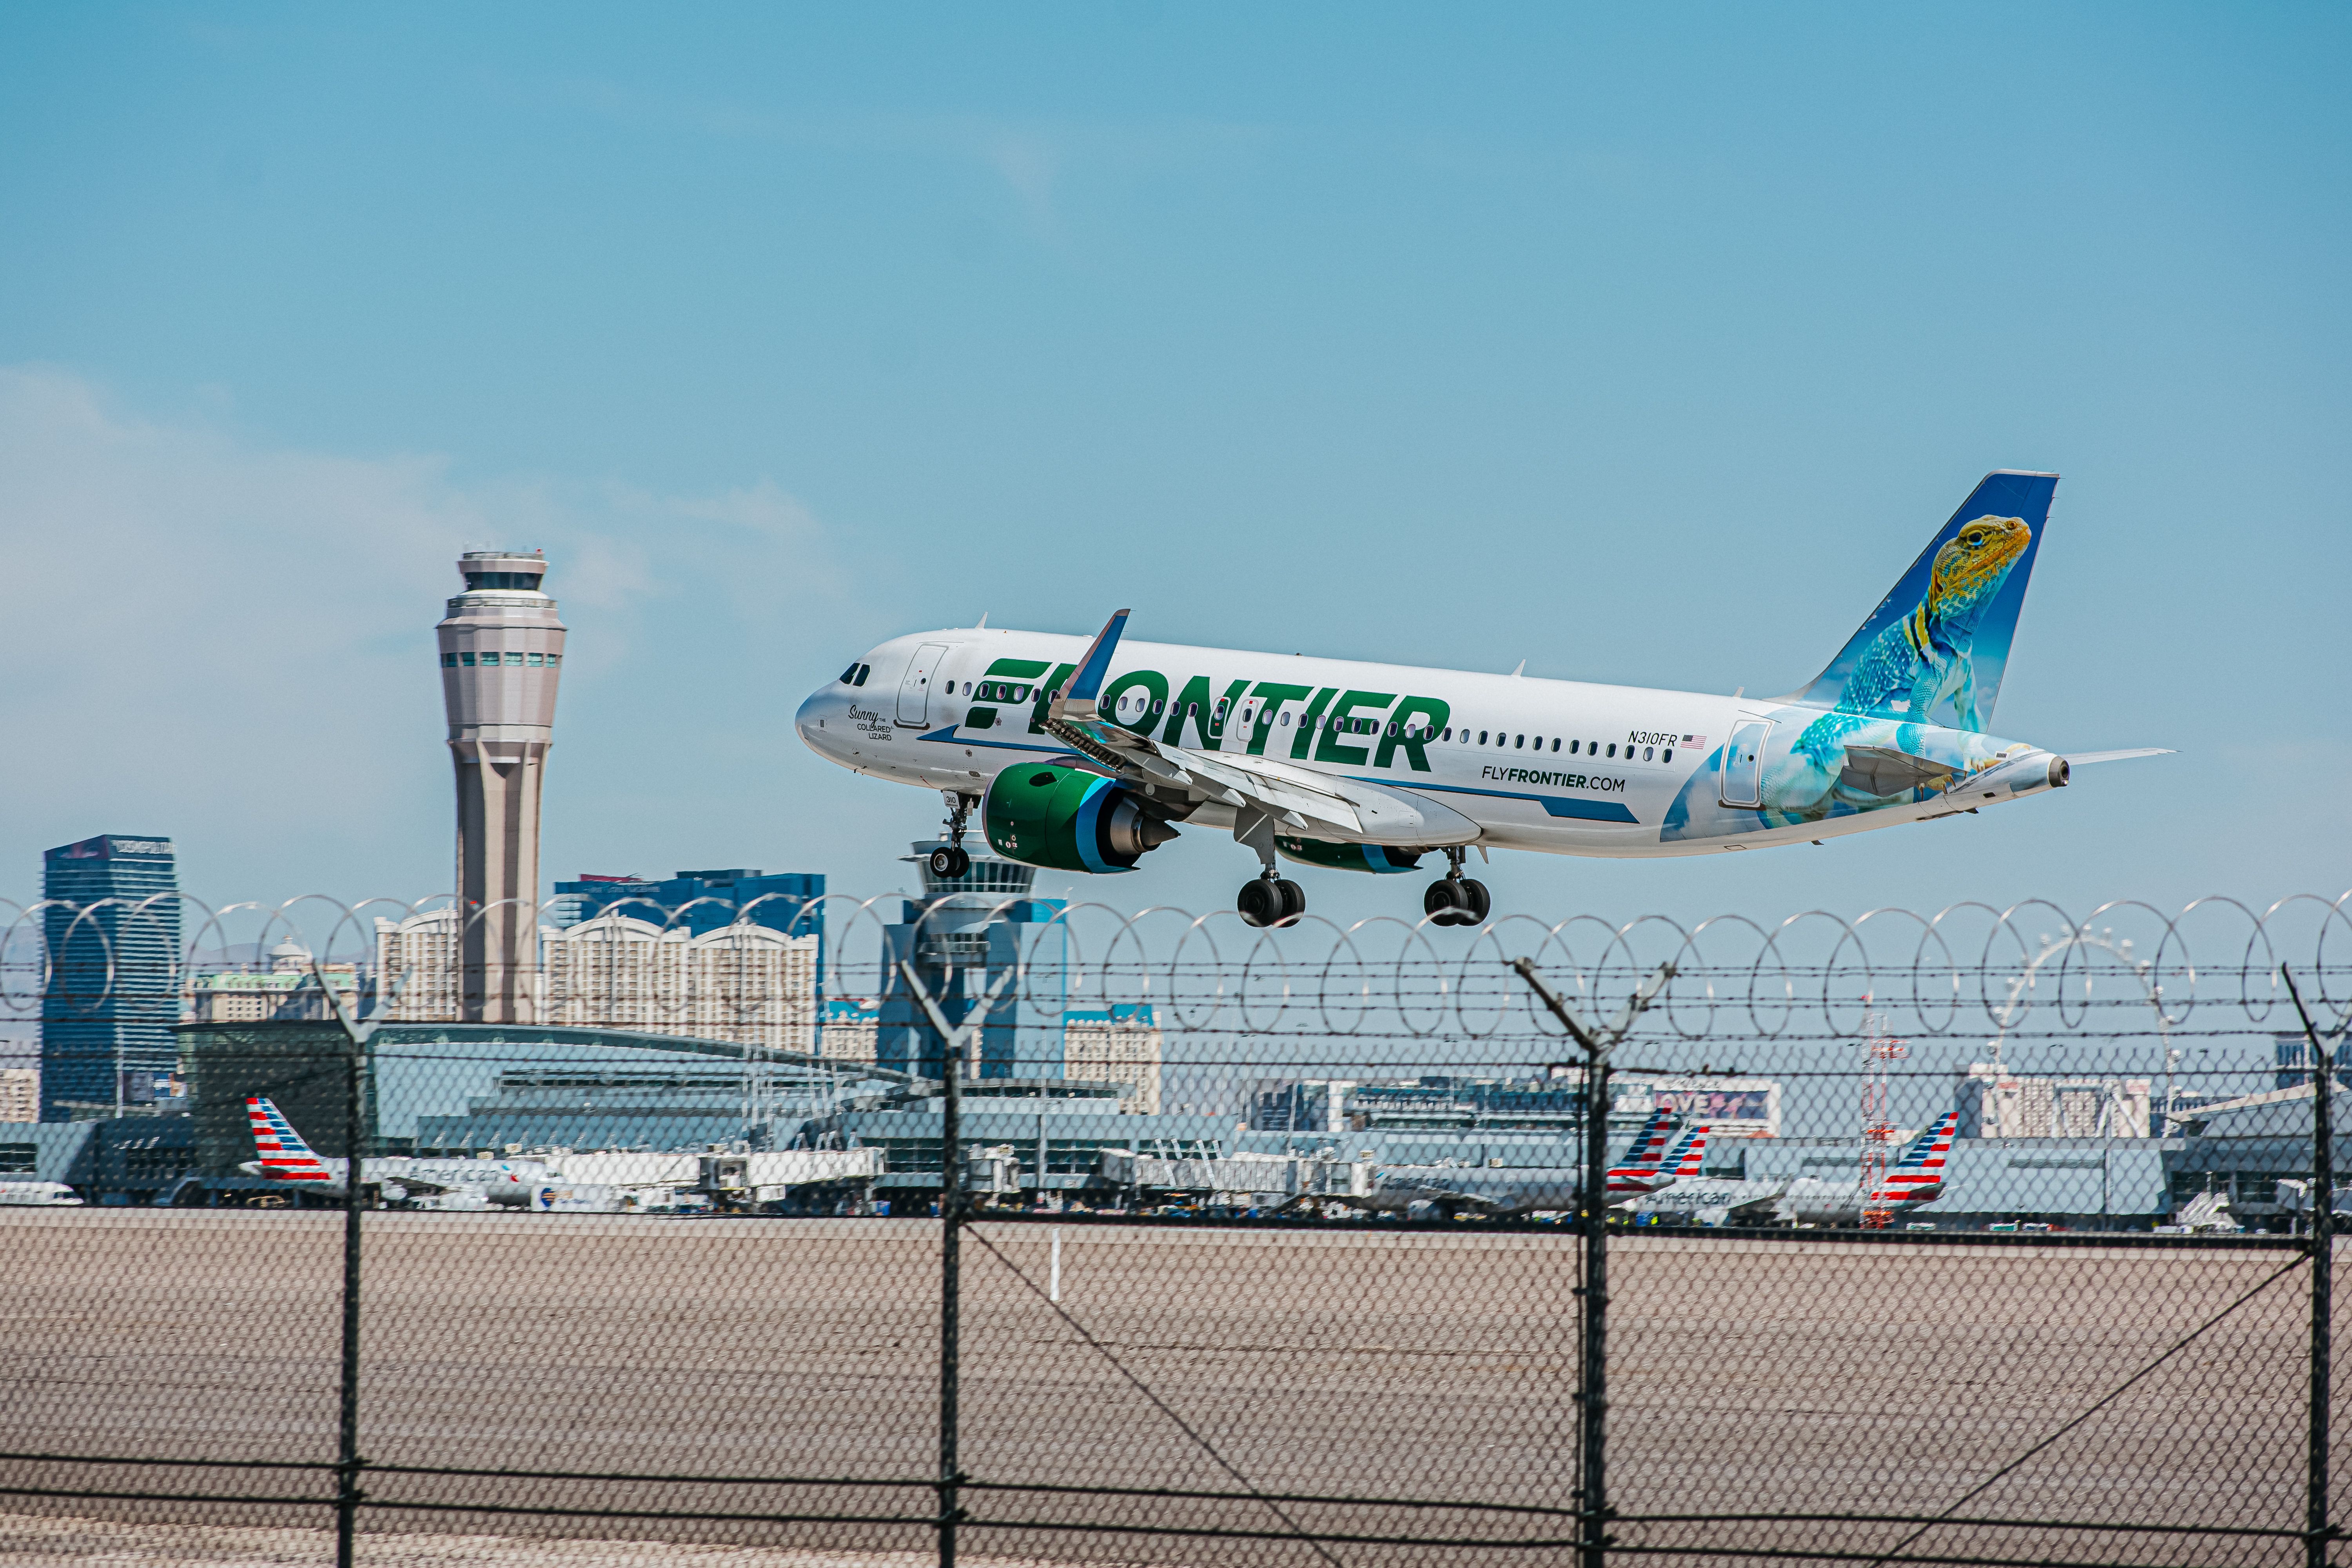 A Frontier Airlines Airbus A320neo landing at LAS.